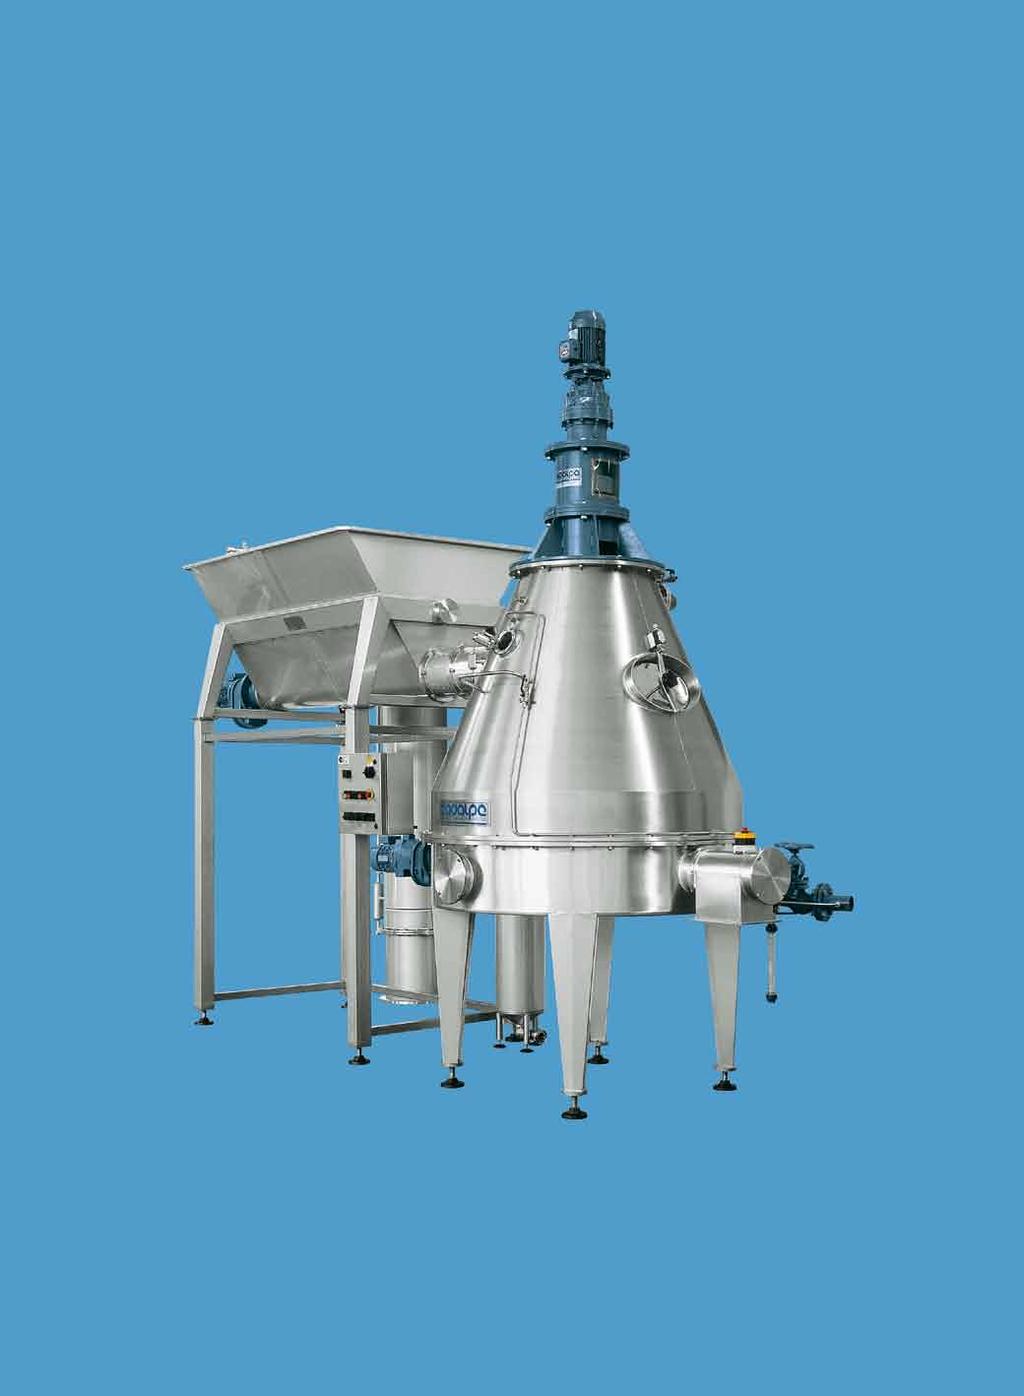 Other features: Uniform steaming of pomace due to slow mixing and the special shape of the alcohol extractor chamber.